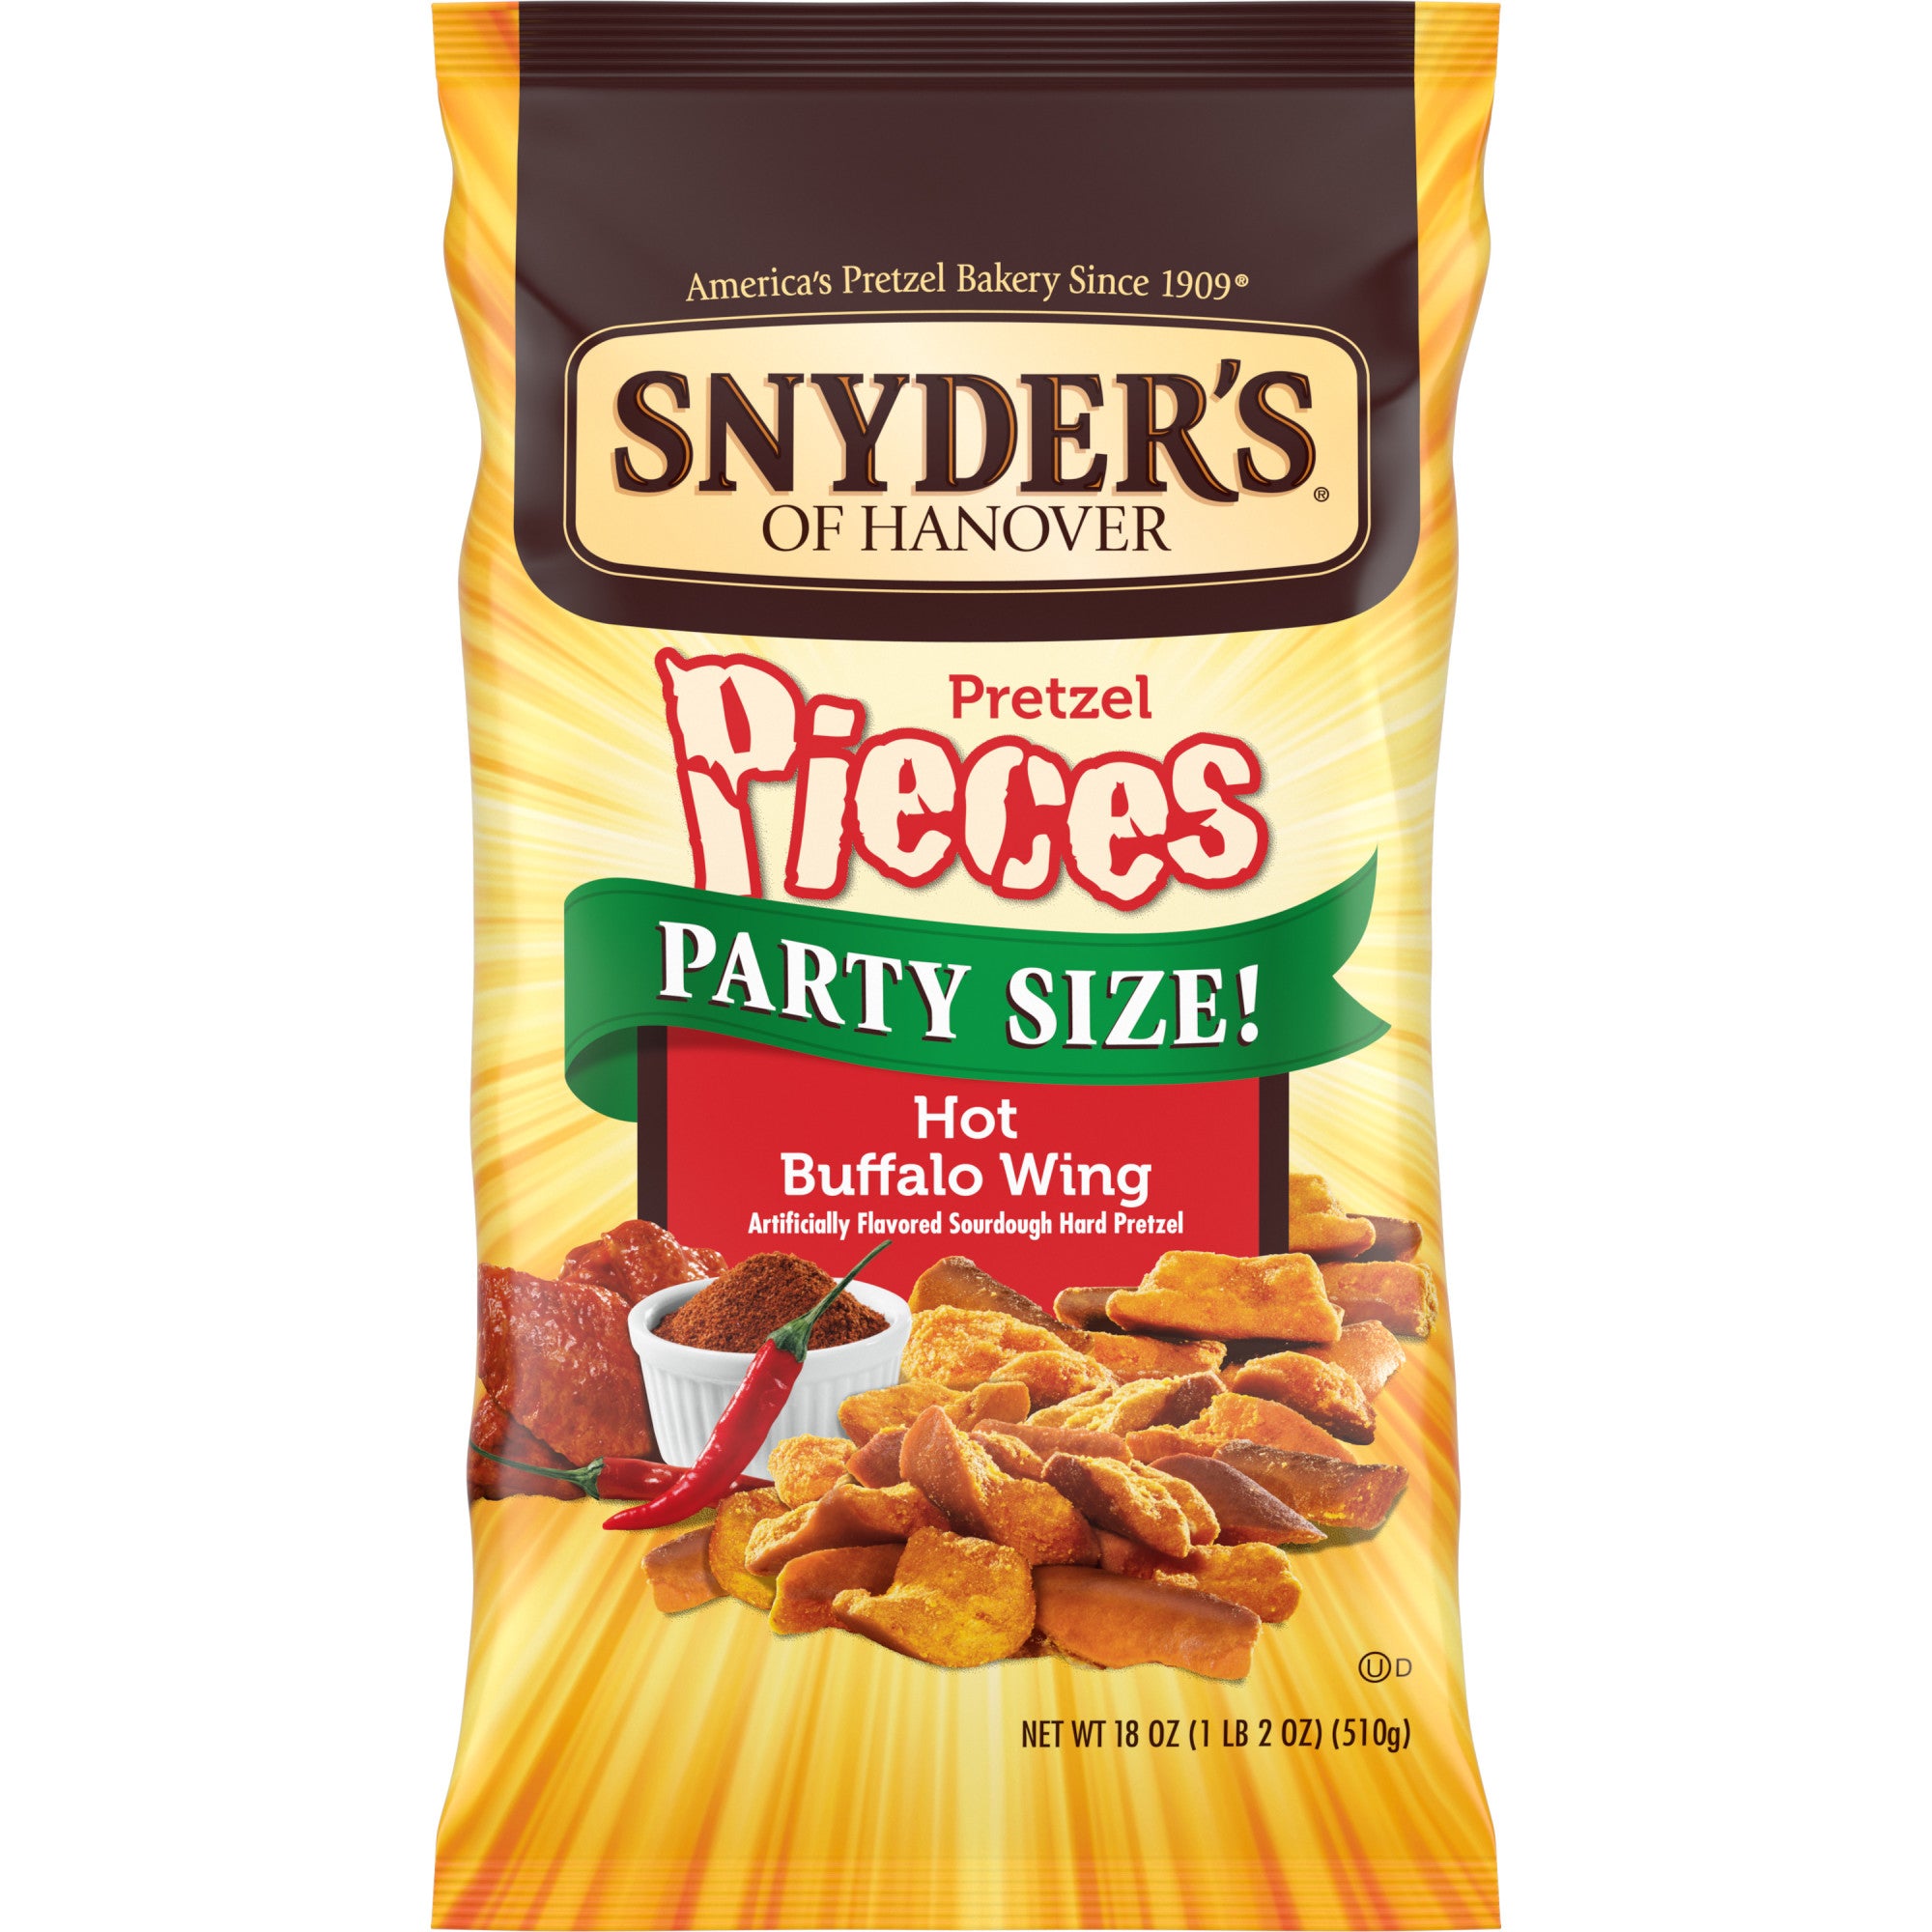 Snyder's of Hanover Pretzel Pieces, Hot Buffalo Wing, Party Size